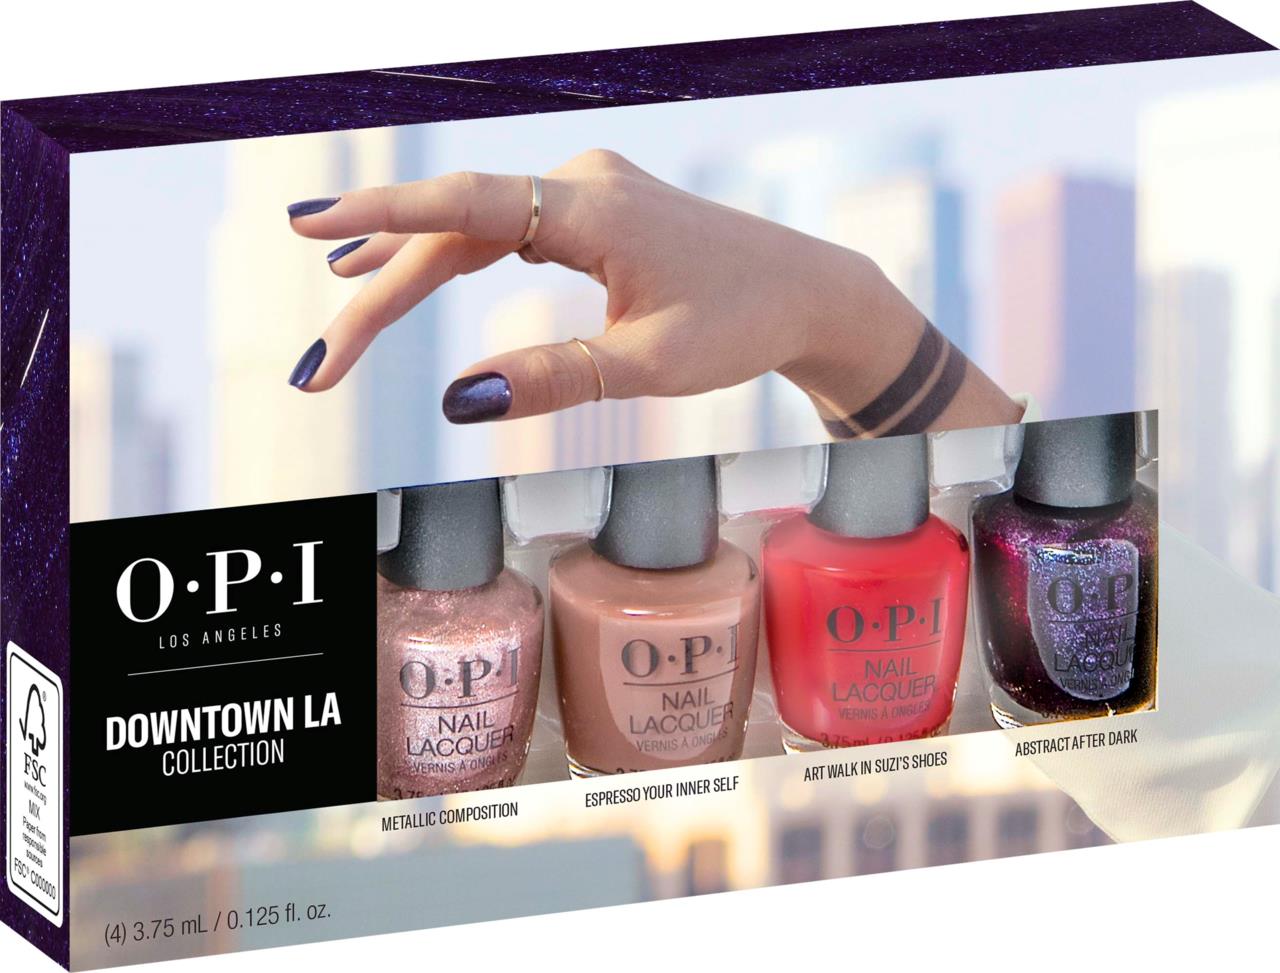 2. OPI Nail Lacquer in Ironic Taffy - wide 2